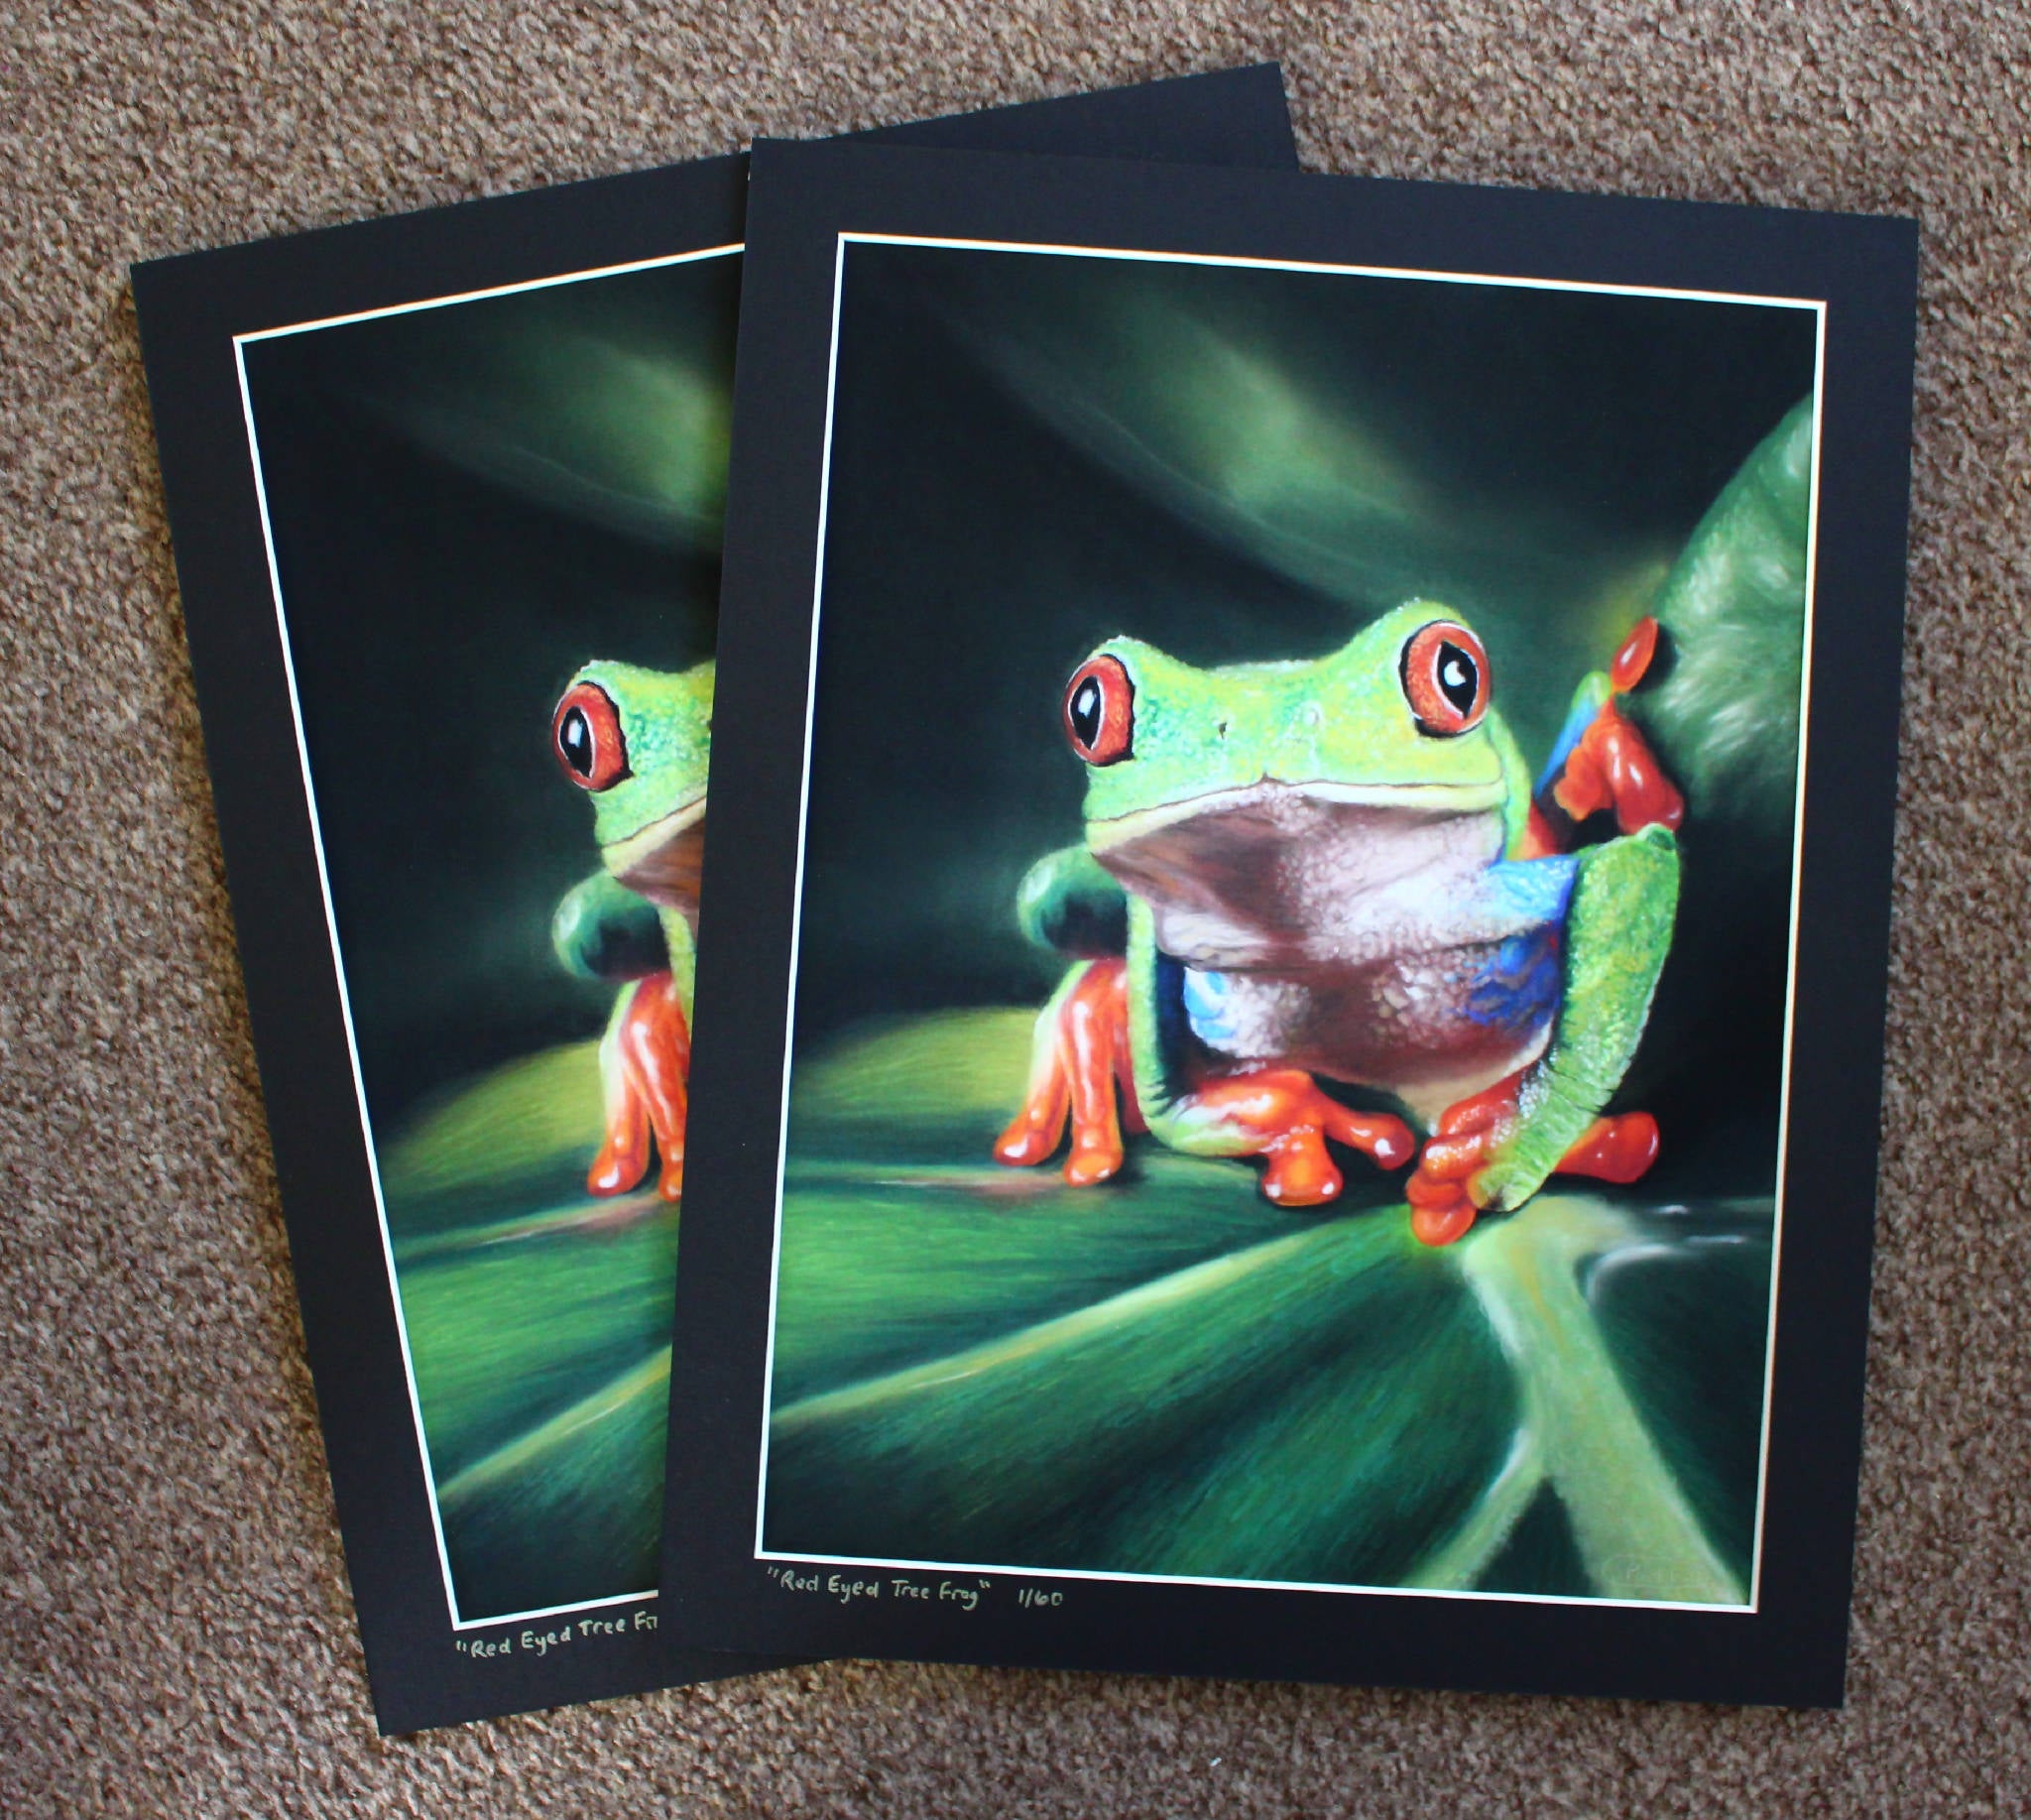 Limited Edition Giclee Print "Red Eyed Tree Frog"